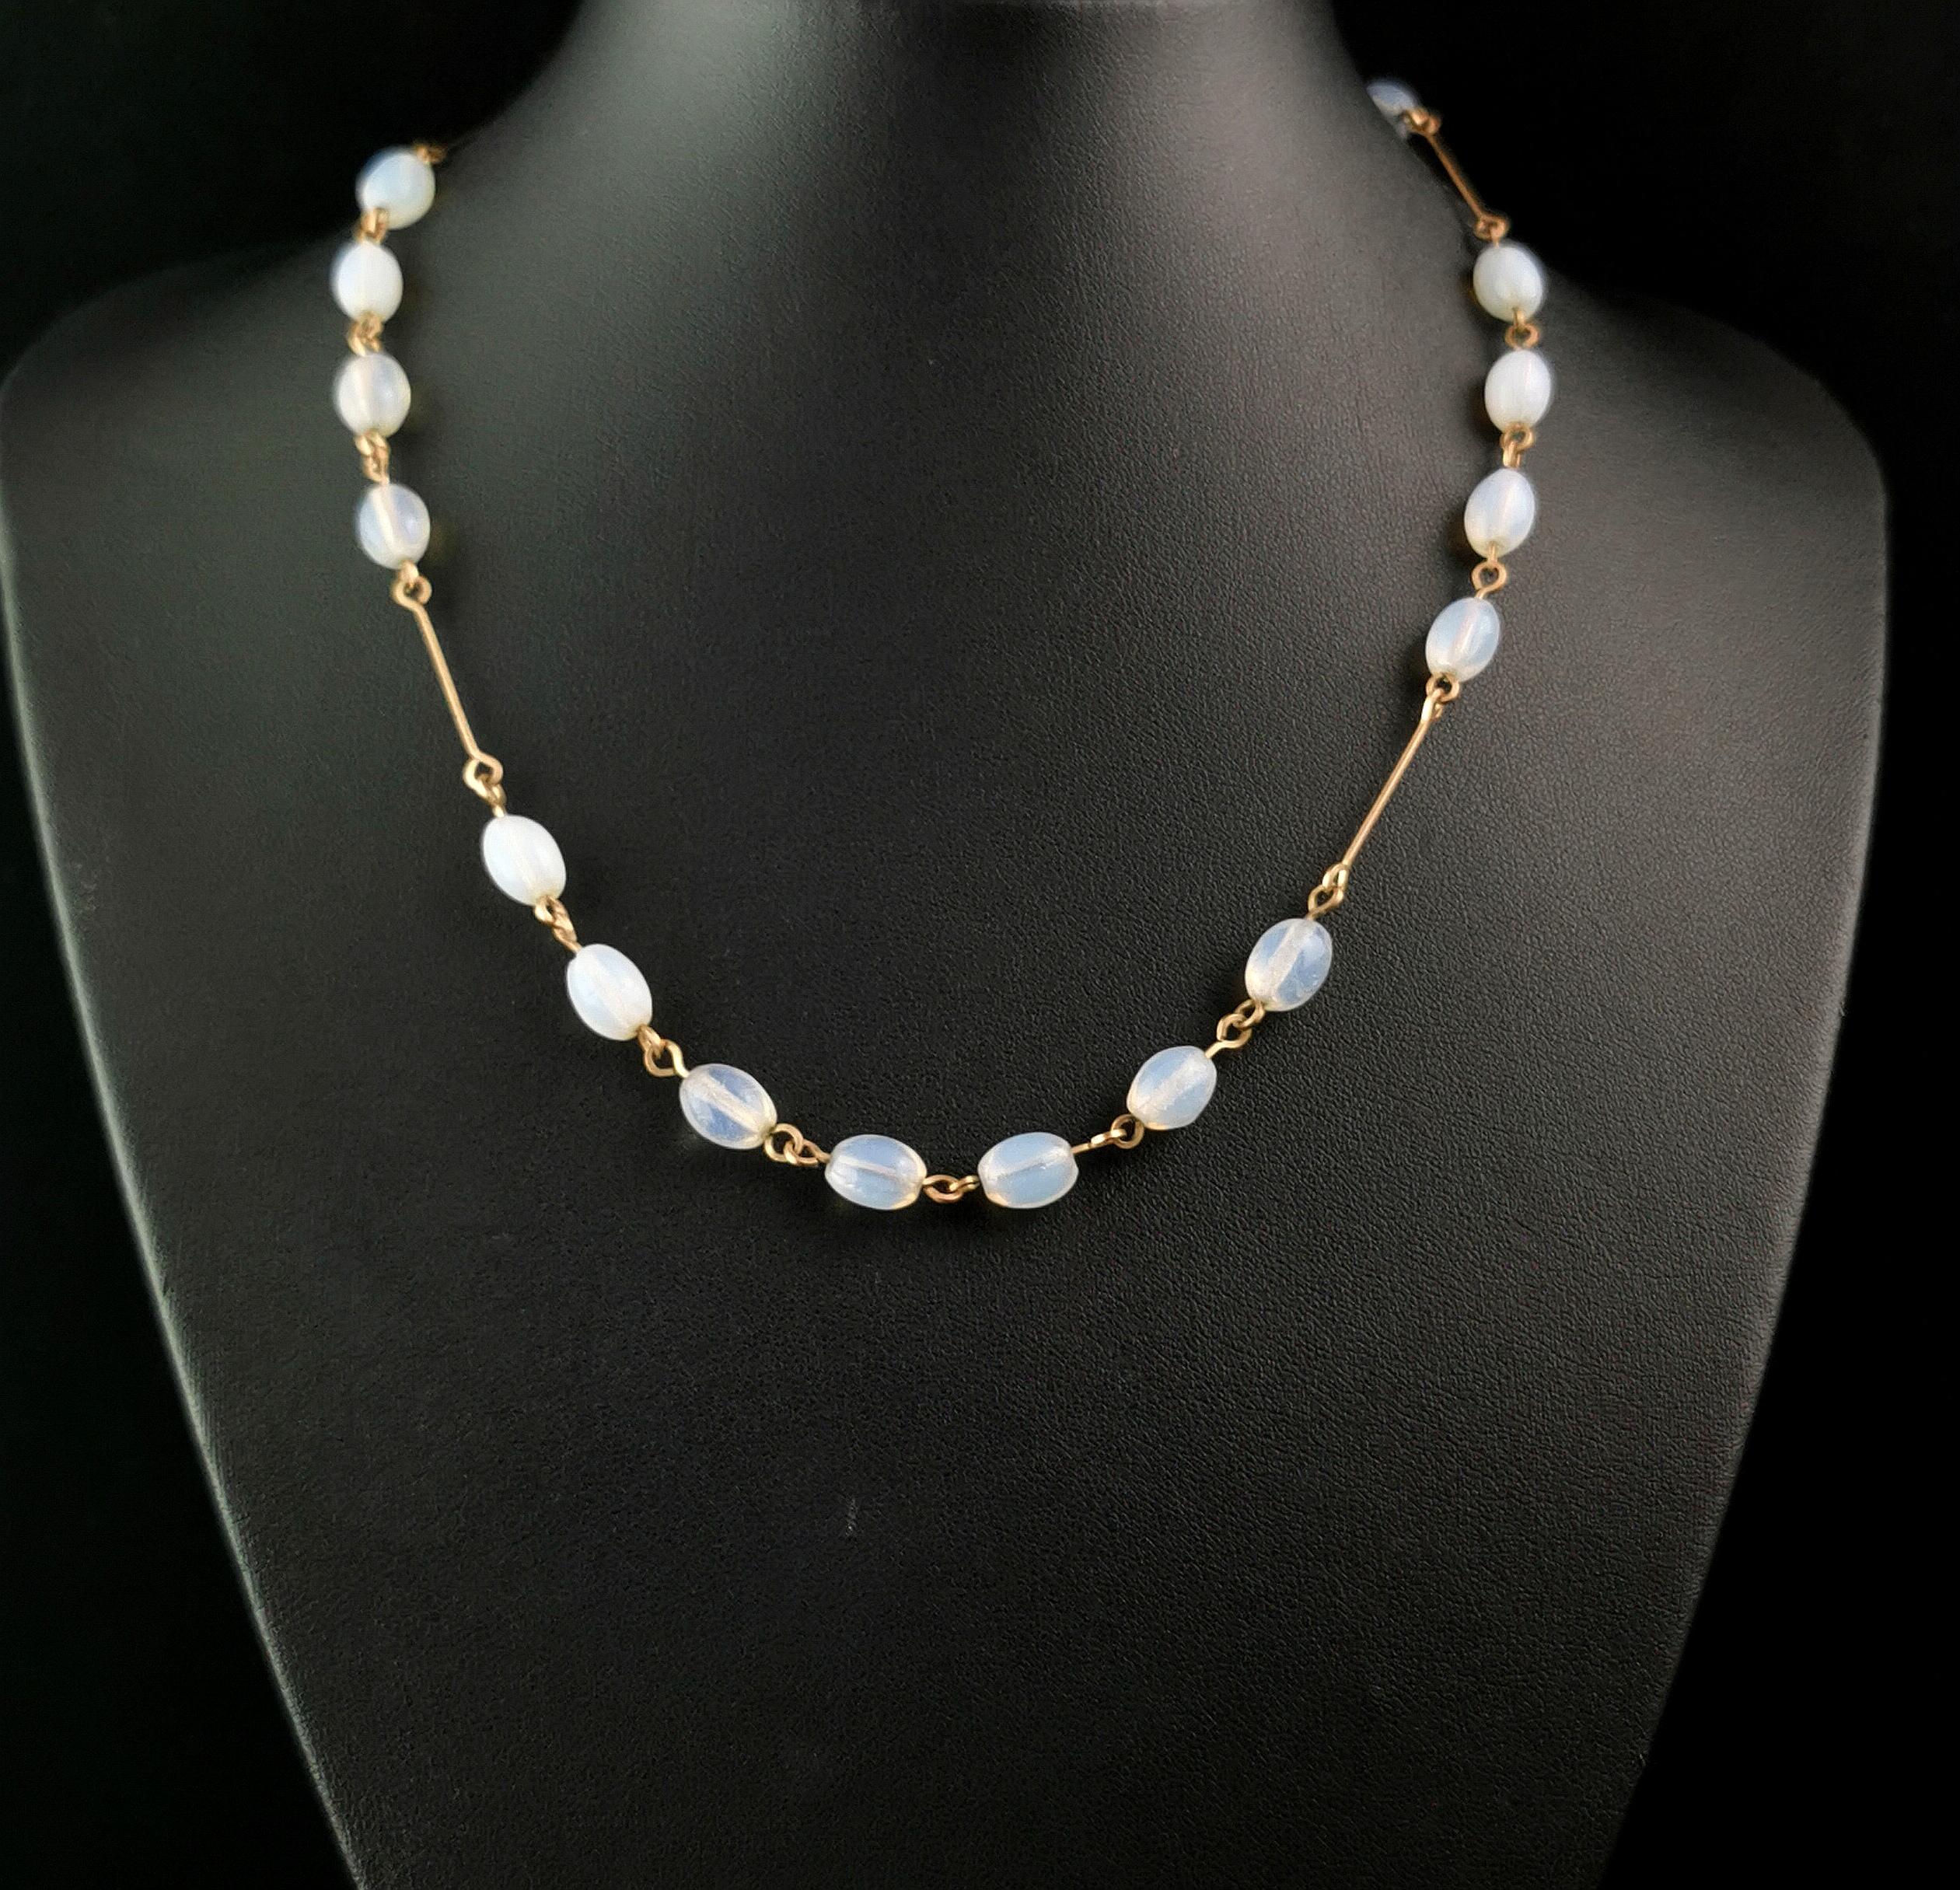 A gorgeous vintage Art Deco opaline glass bead necklace.

It is made up from oval shaped opaline glass beads, slightly opaque with a mostly blue hue.

The beads are affixed to a gold plated chain necklace with a hook fastener.

An elegant and